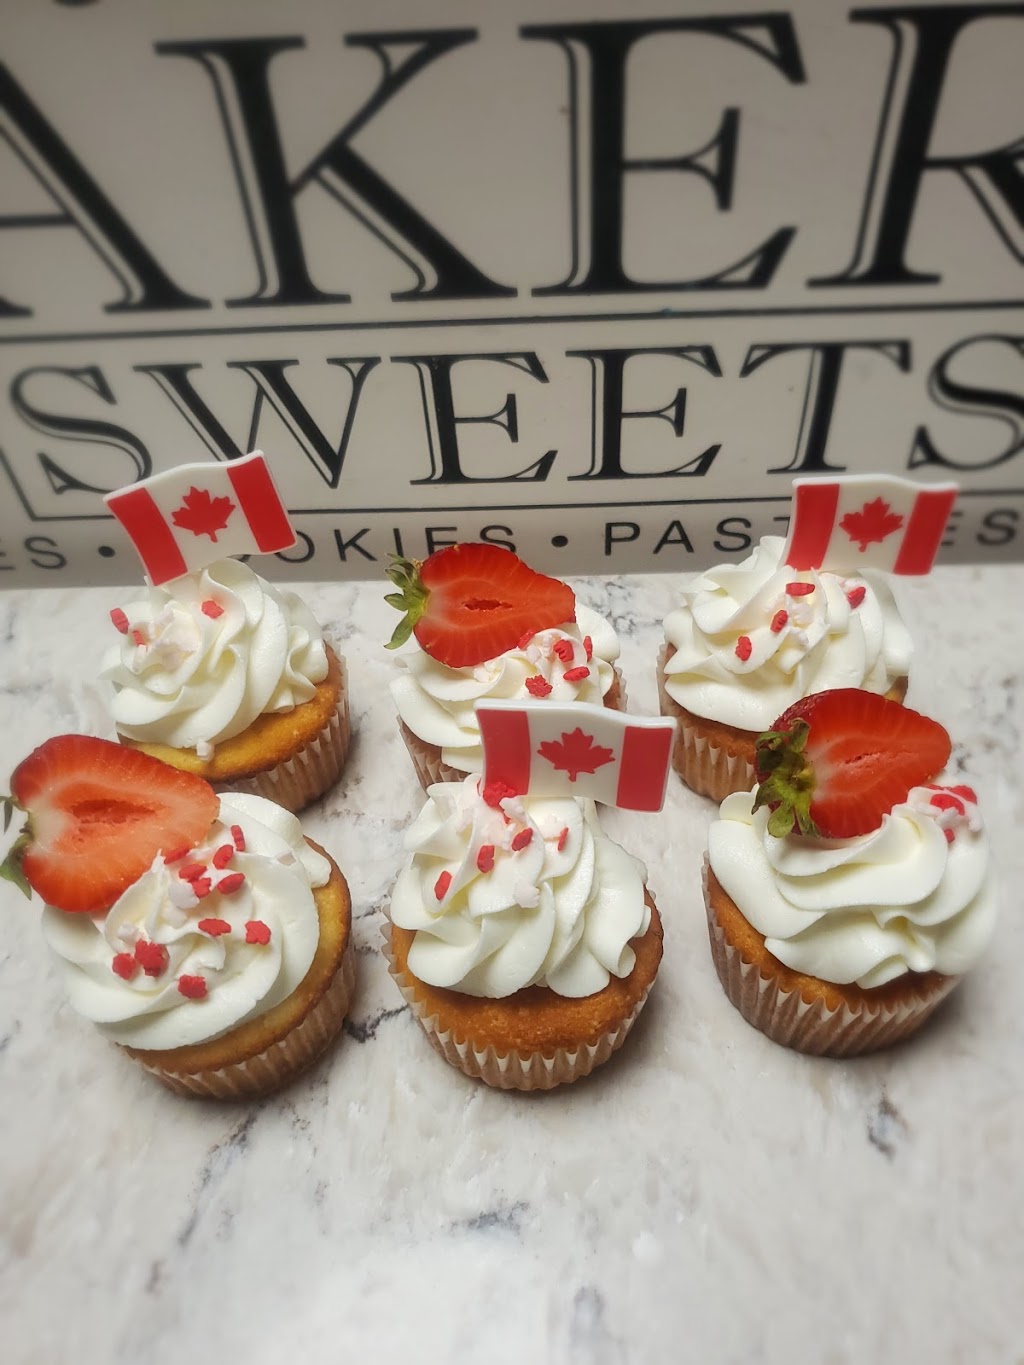 Whisk & Roll Bakery | 687 Henry St, Woodstock, ON N4S 1Y2, Canada | Phone: (519) 532-3485